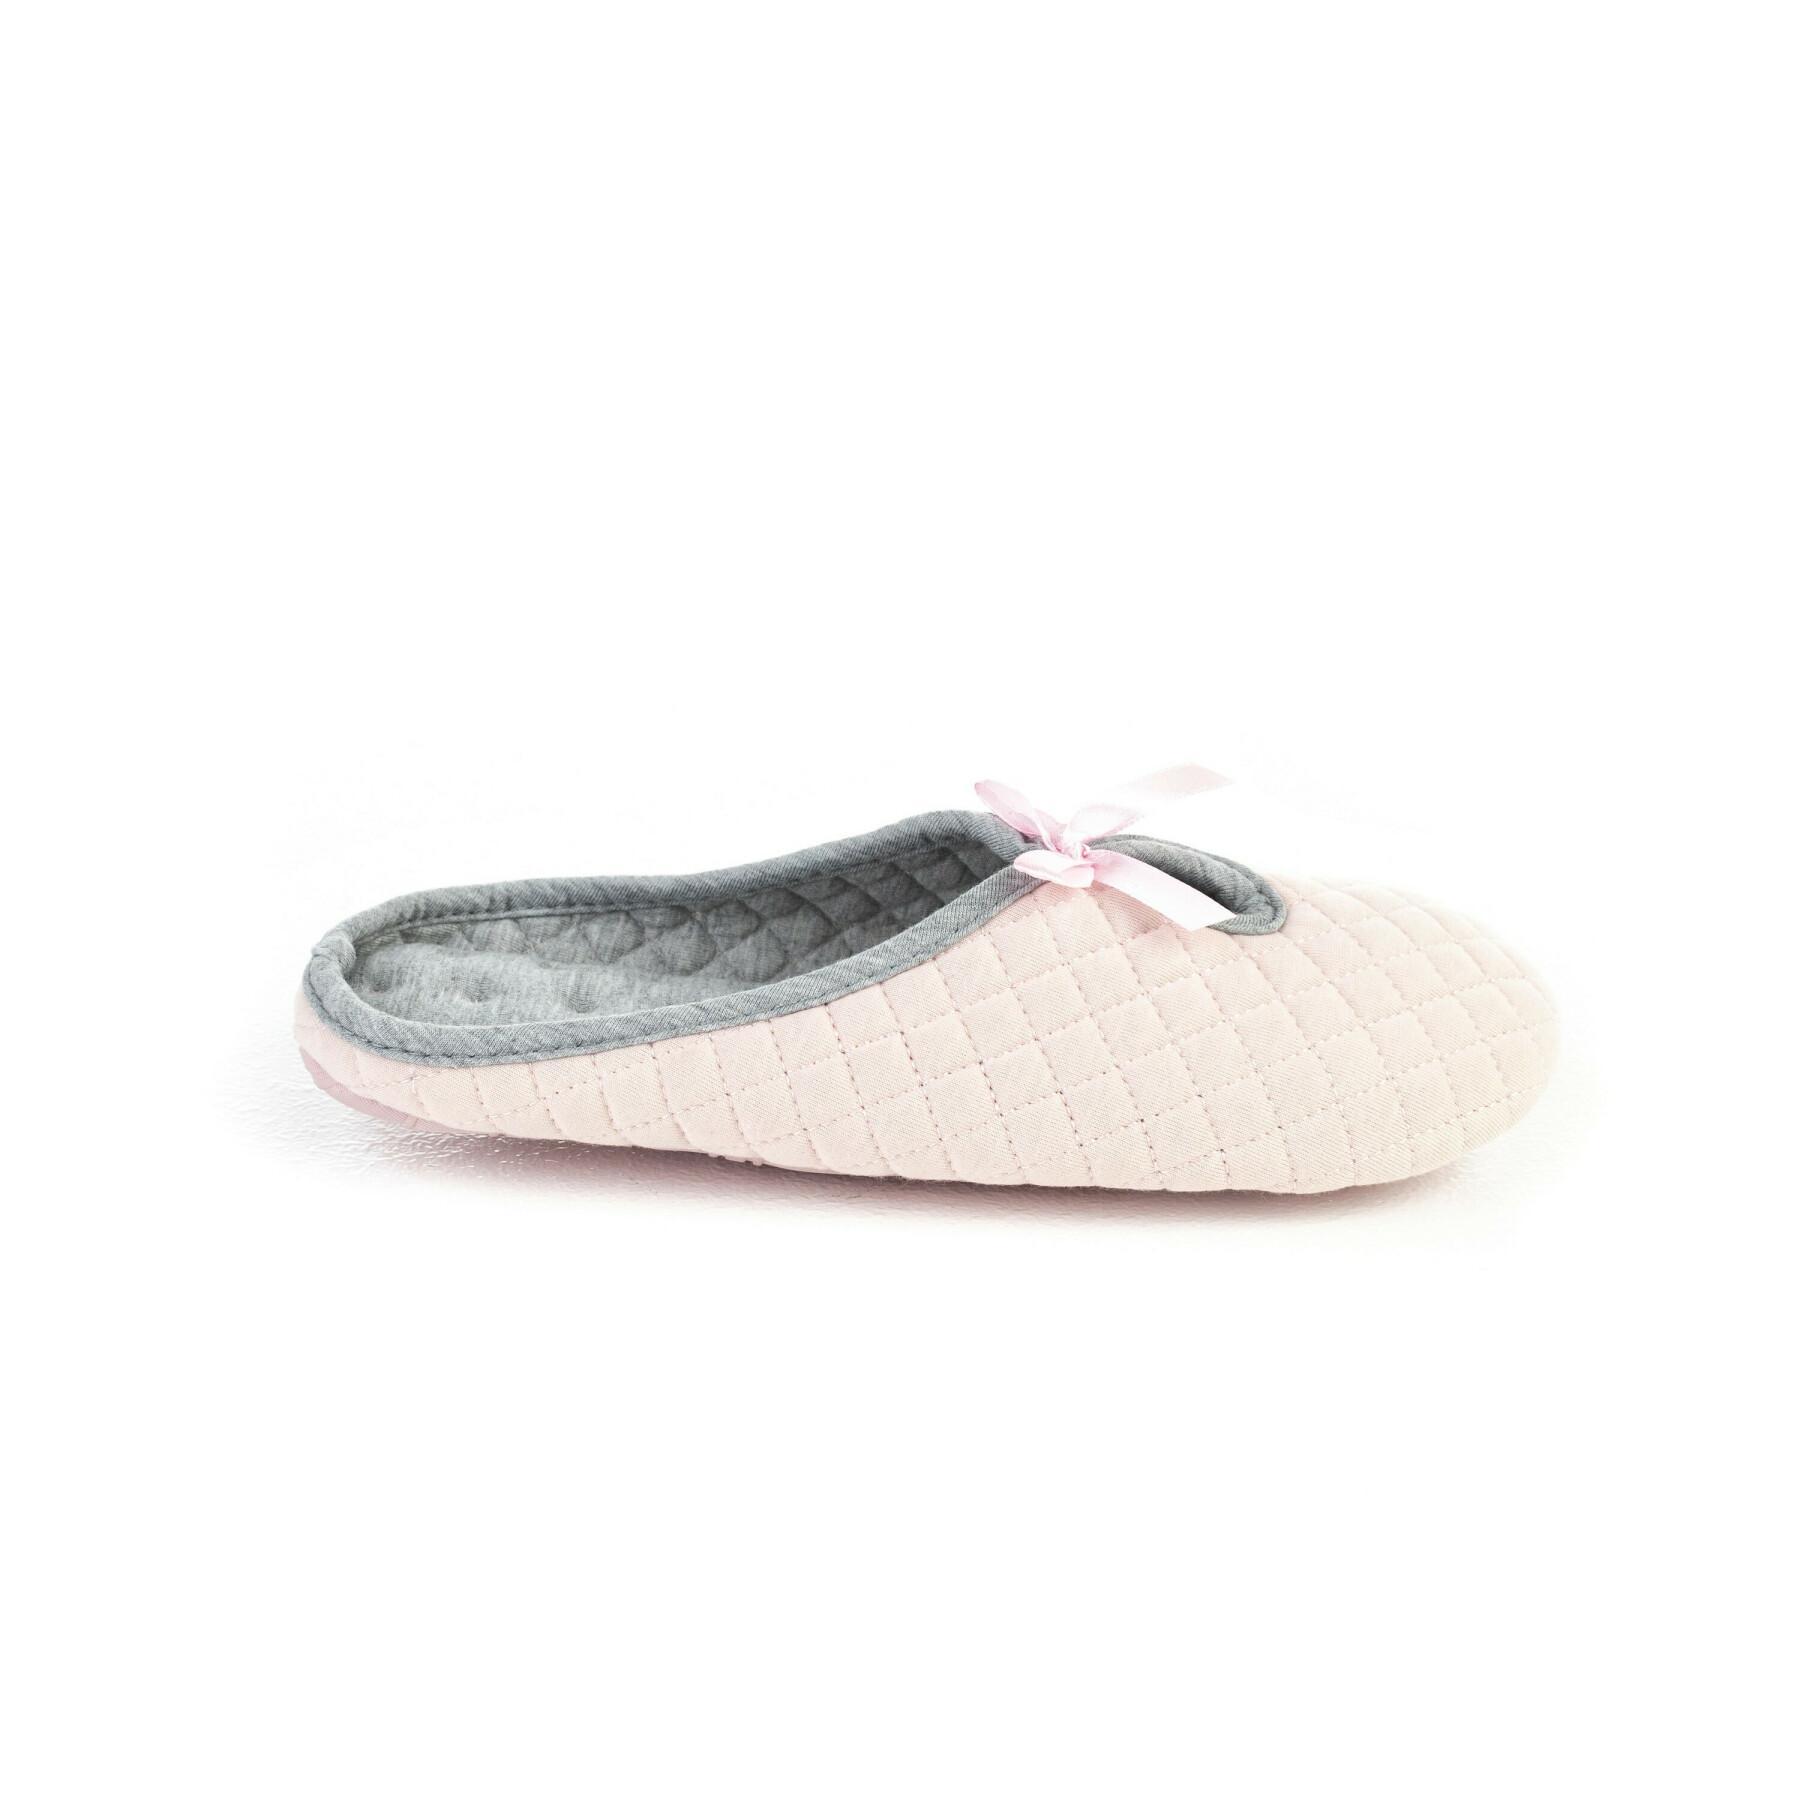 Women's slippers Funky Steps Victoria